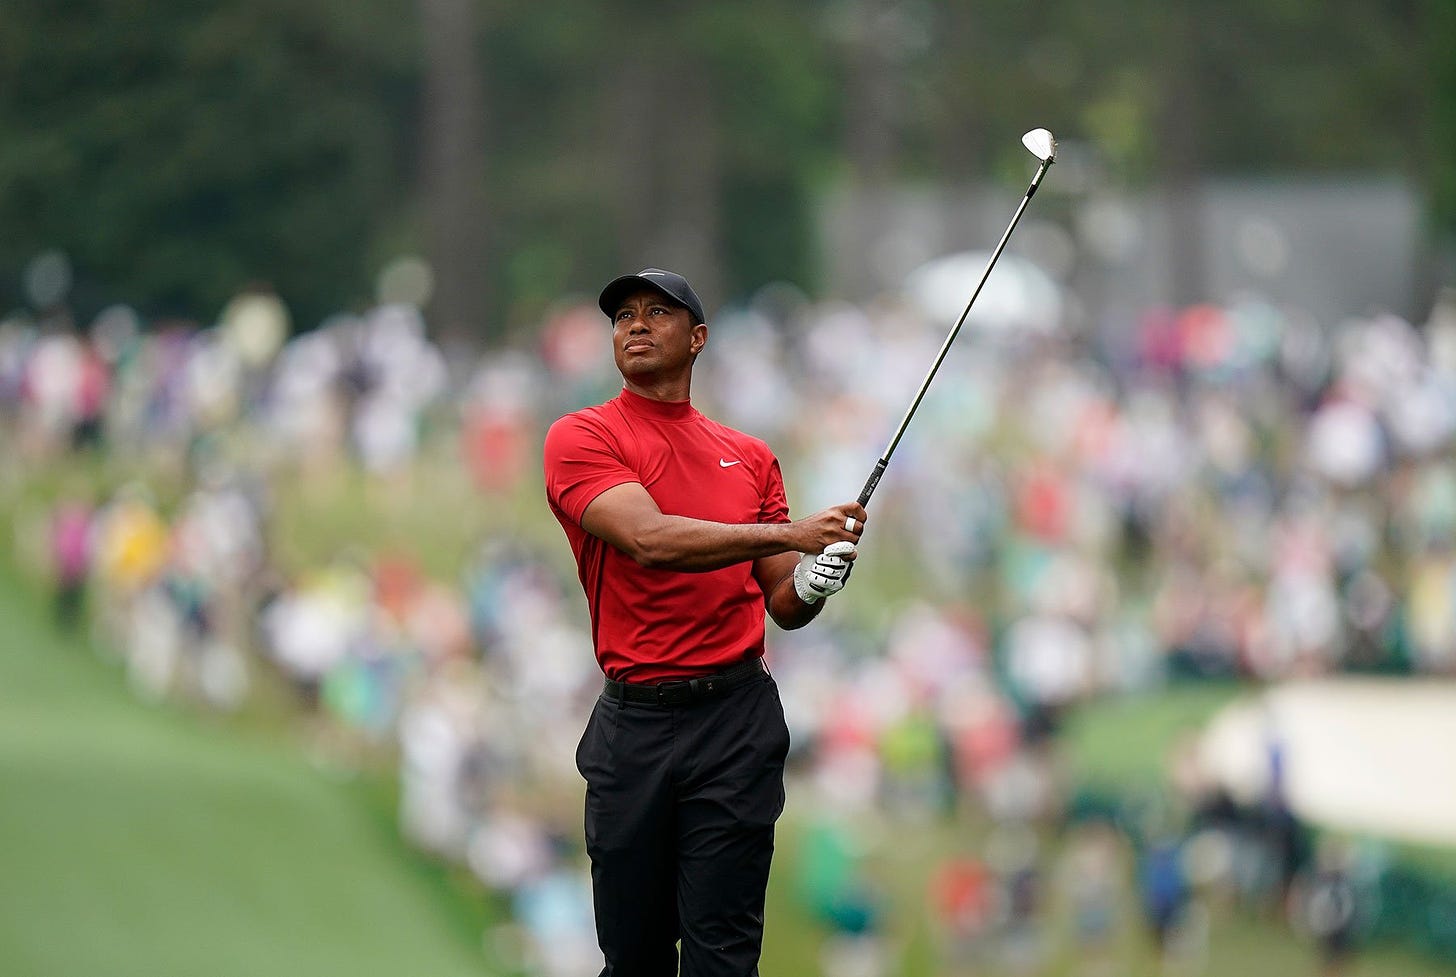 Tiger Woods Is on the 2019 TIME 100 List | Time.com